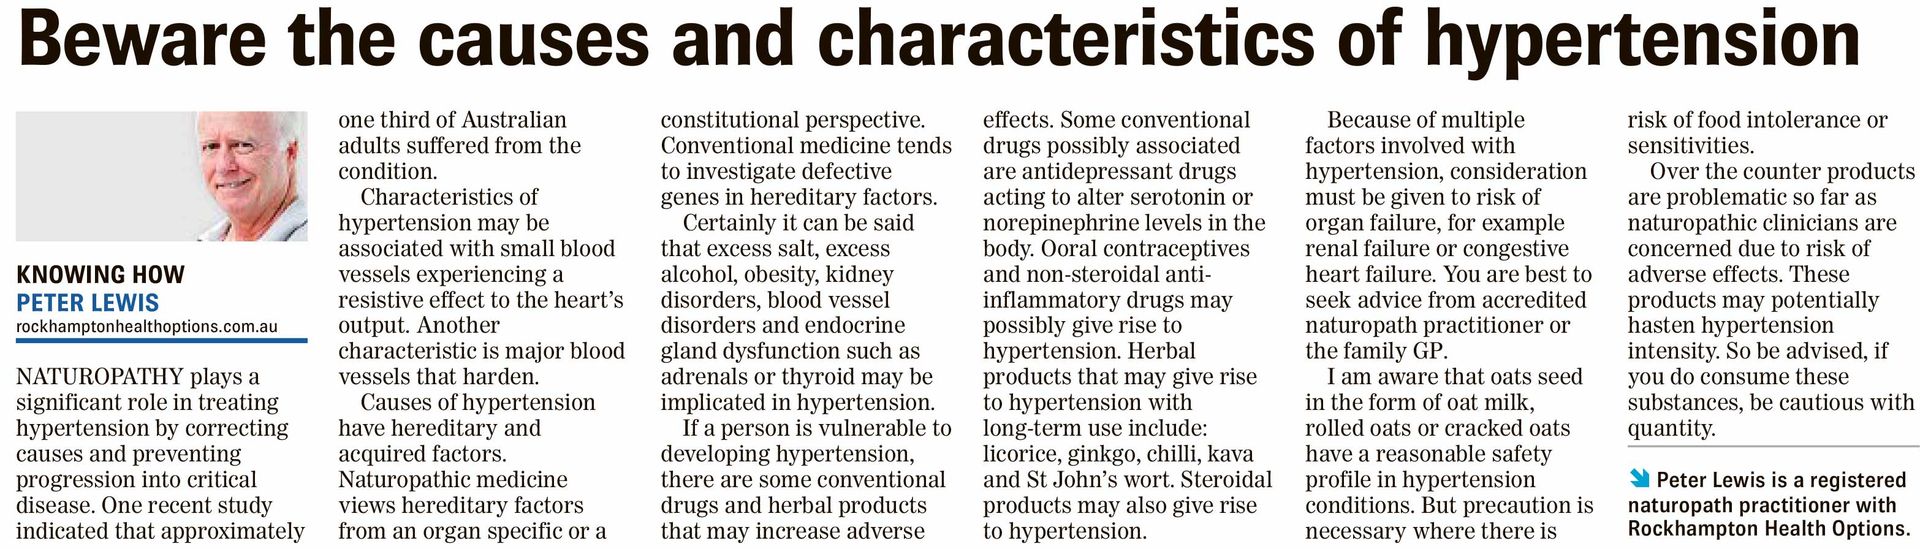 Beware the causes and characteristics of hypertension article 